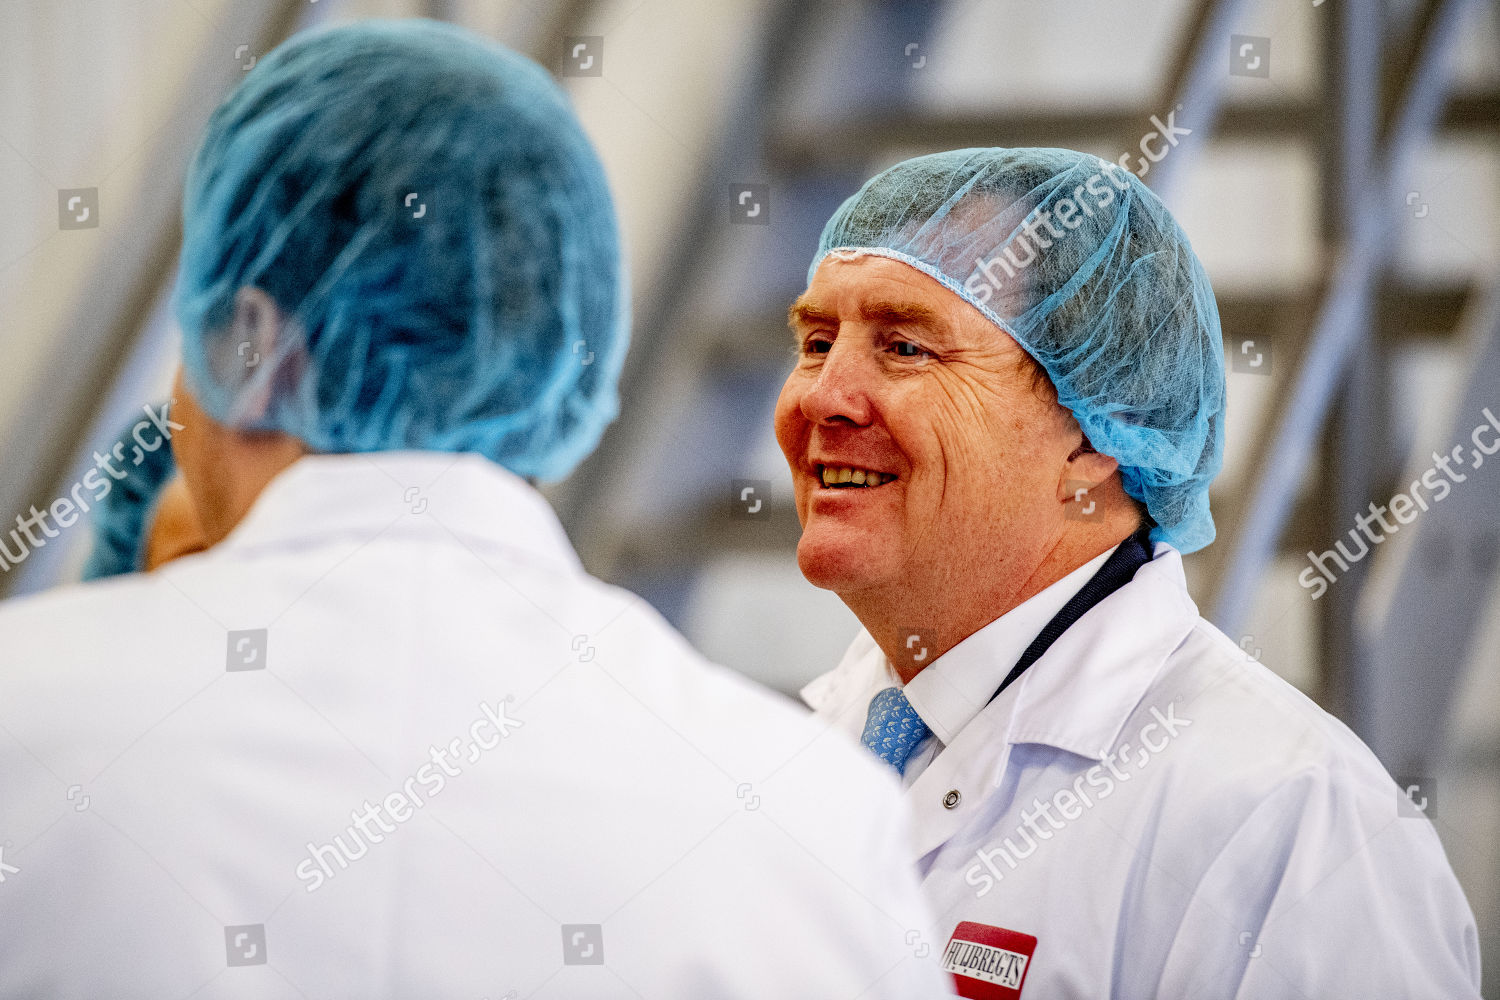 king-willem-alexander-is-making-a-working-visit-to-two-companies-in-brainport-eindhoven-helmond-the-netherlands-shutterstock-editorial-10031459h.jpg